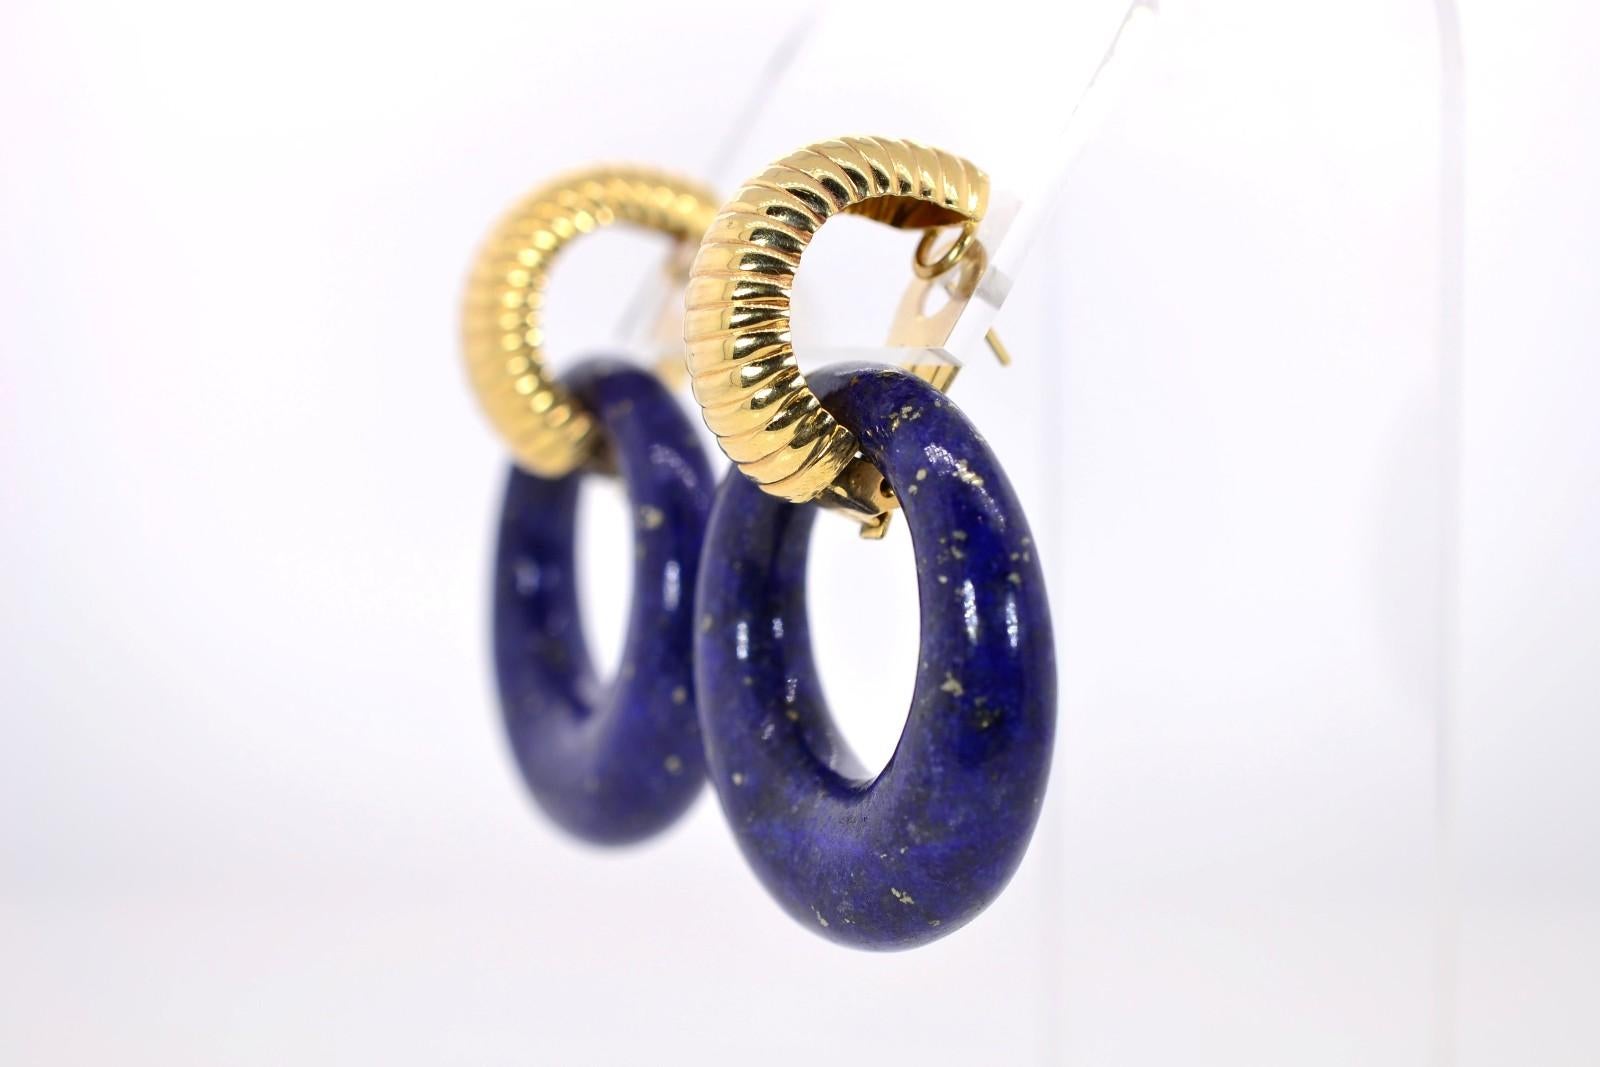 Fabulous and versatile circa 1960s large Lapis Lazuli hoops.  The Lapis dangles from a 14KT yellow gold detachable 